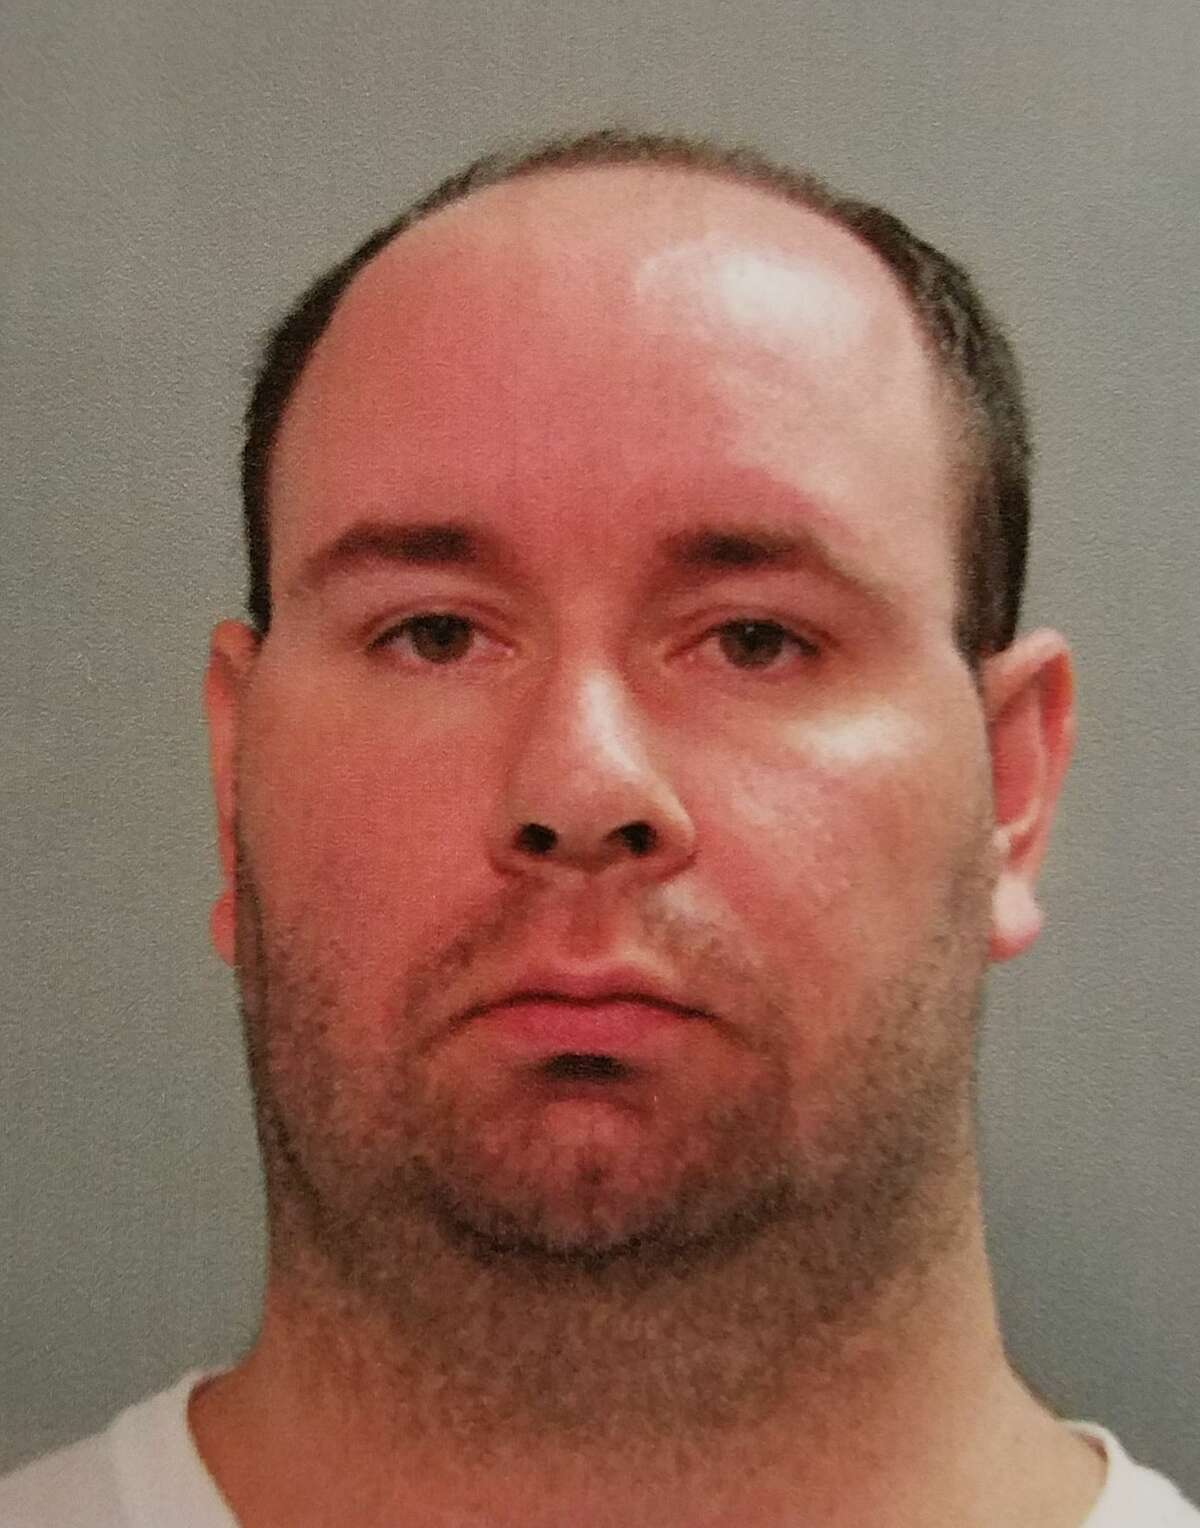 Former Dayton ISD teacher Joshua Janecka is charged with 5 counts possession of child pornography and 1 count promotion of child pornography.Harris County Precinct 4